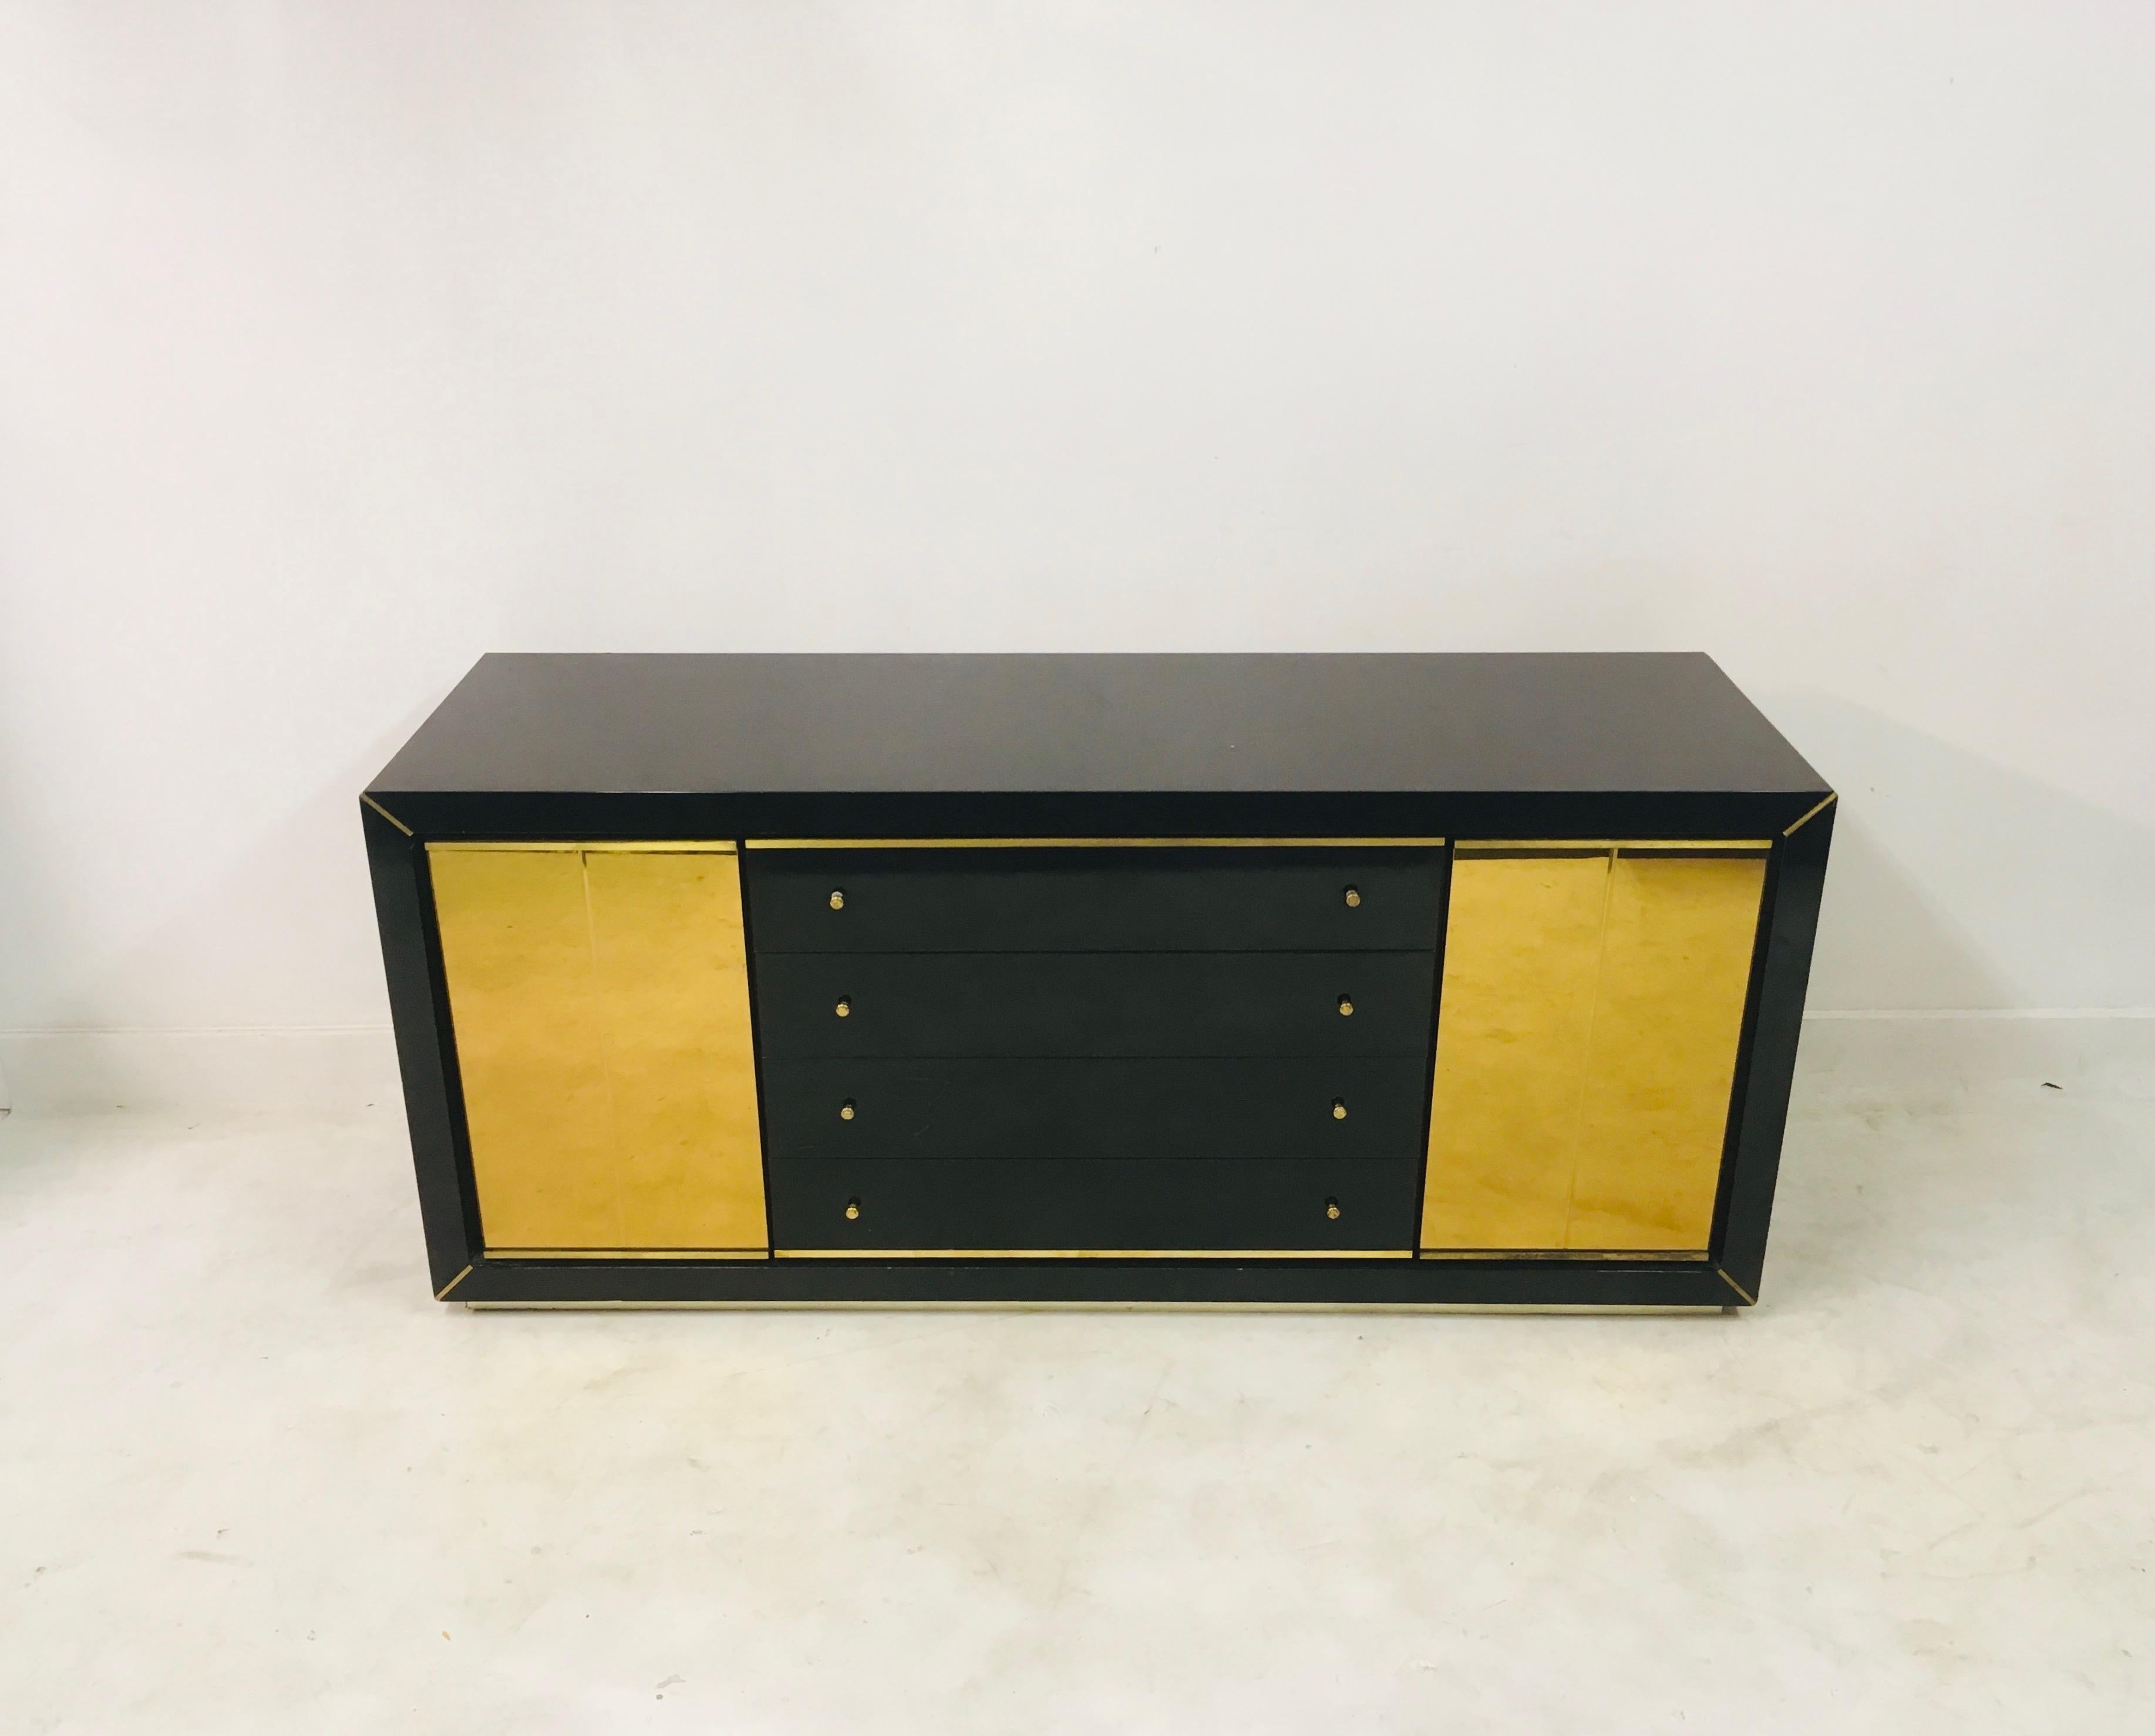 Black lacquered sideboard

Brass handles

Brass base and corner detail

Two gold glass doors

Four drawers

Italy, 1970s.